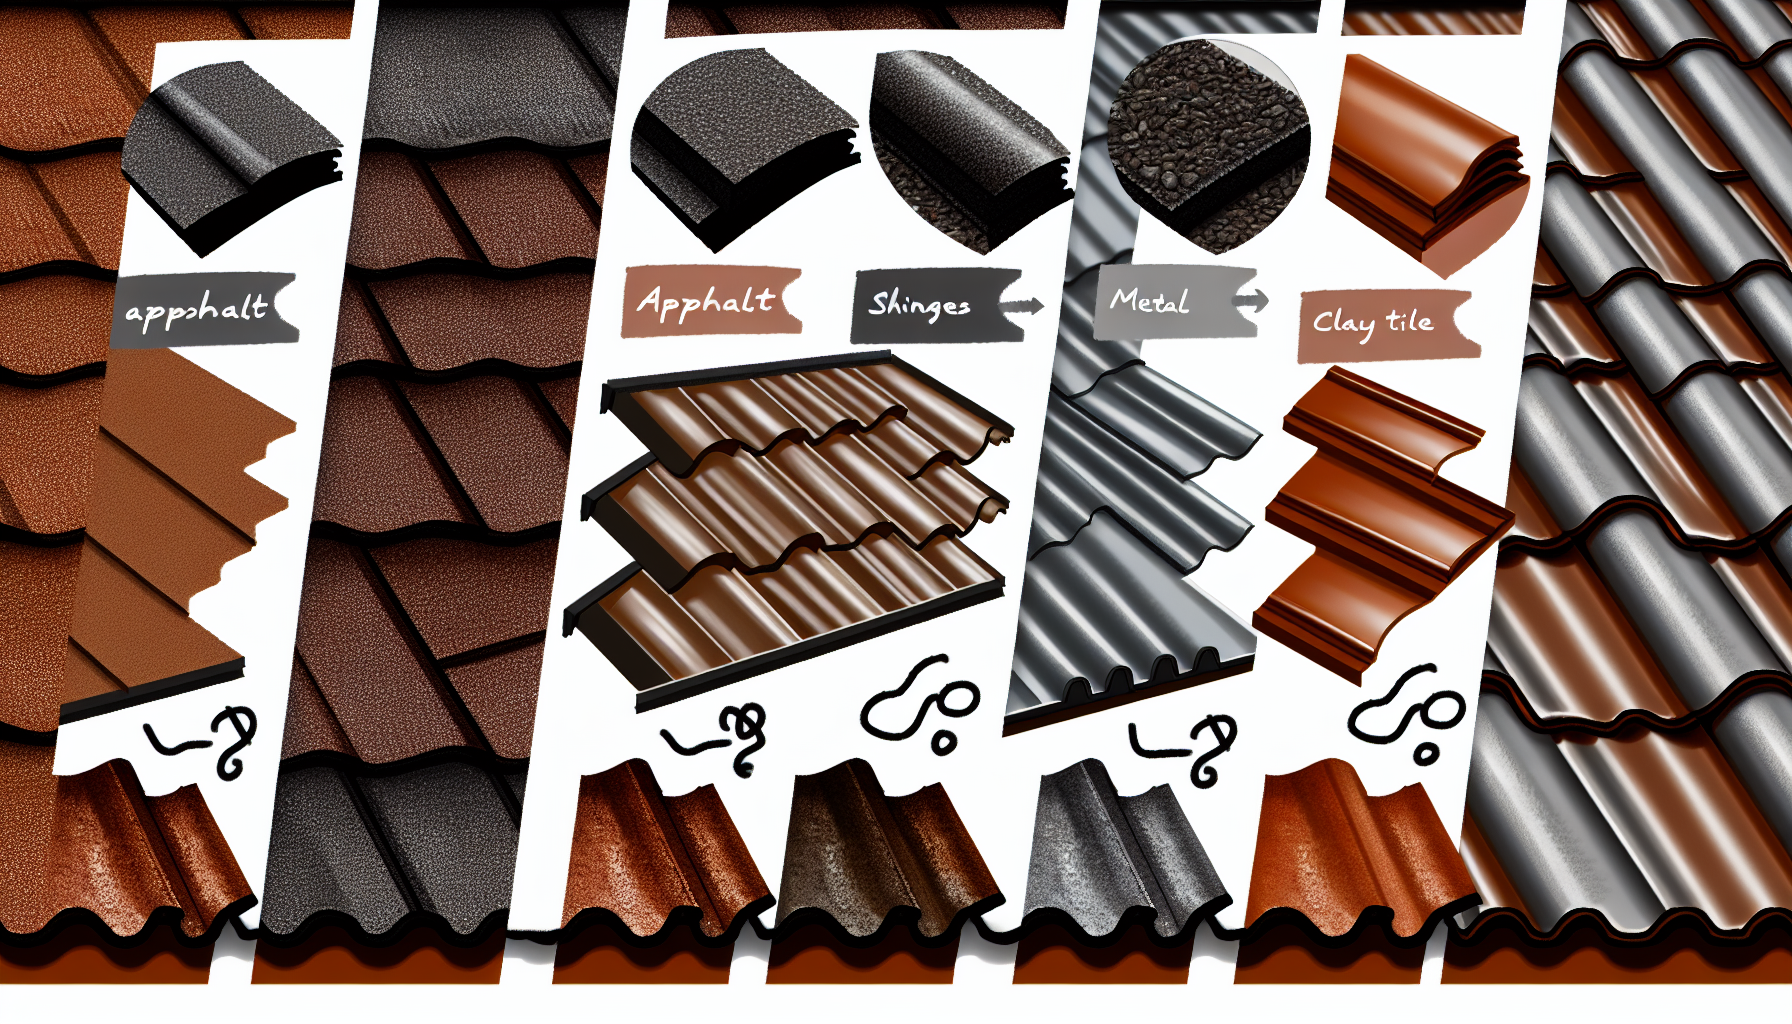 Comparing roofing materials